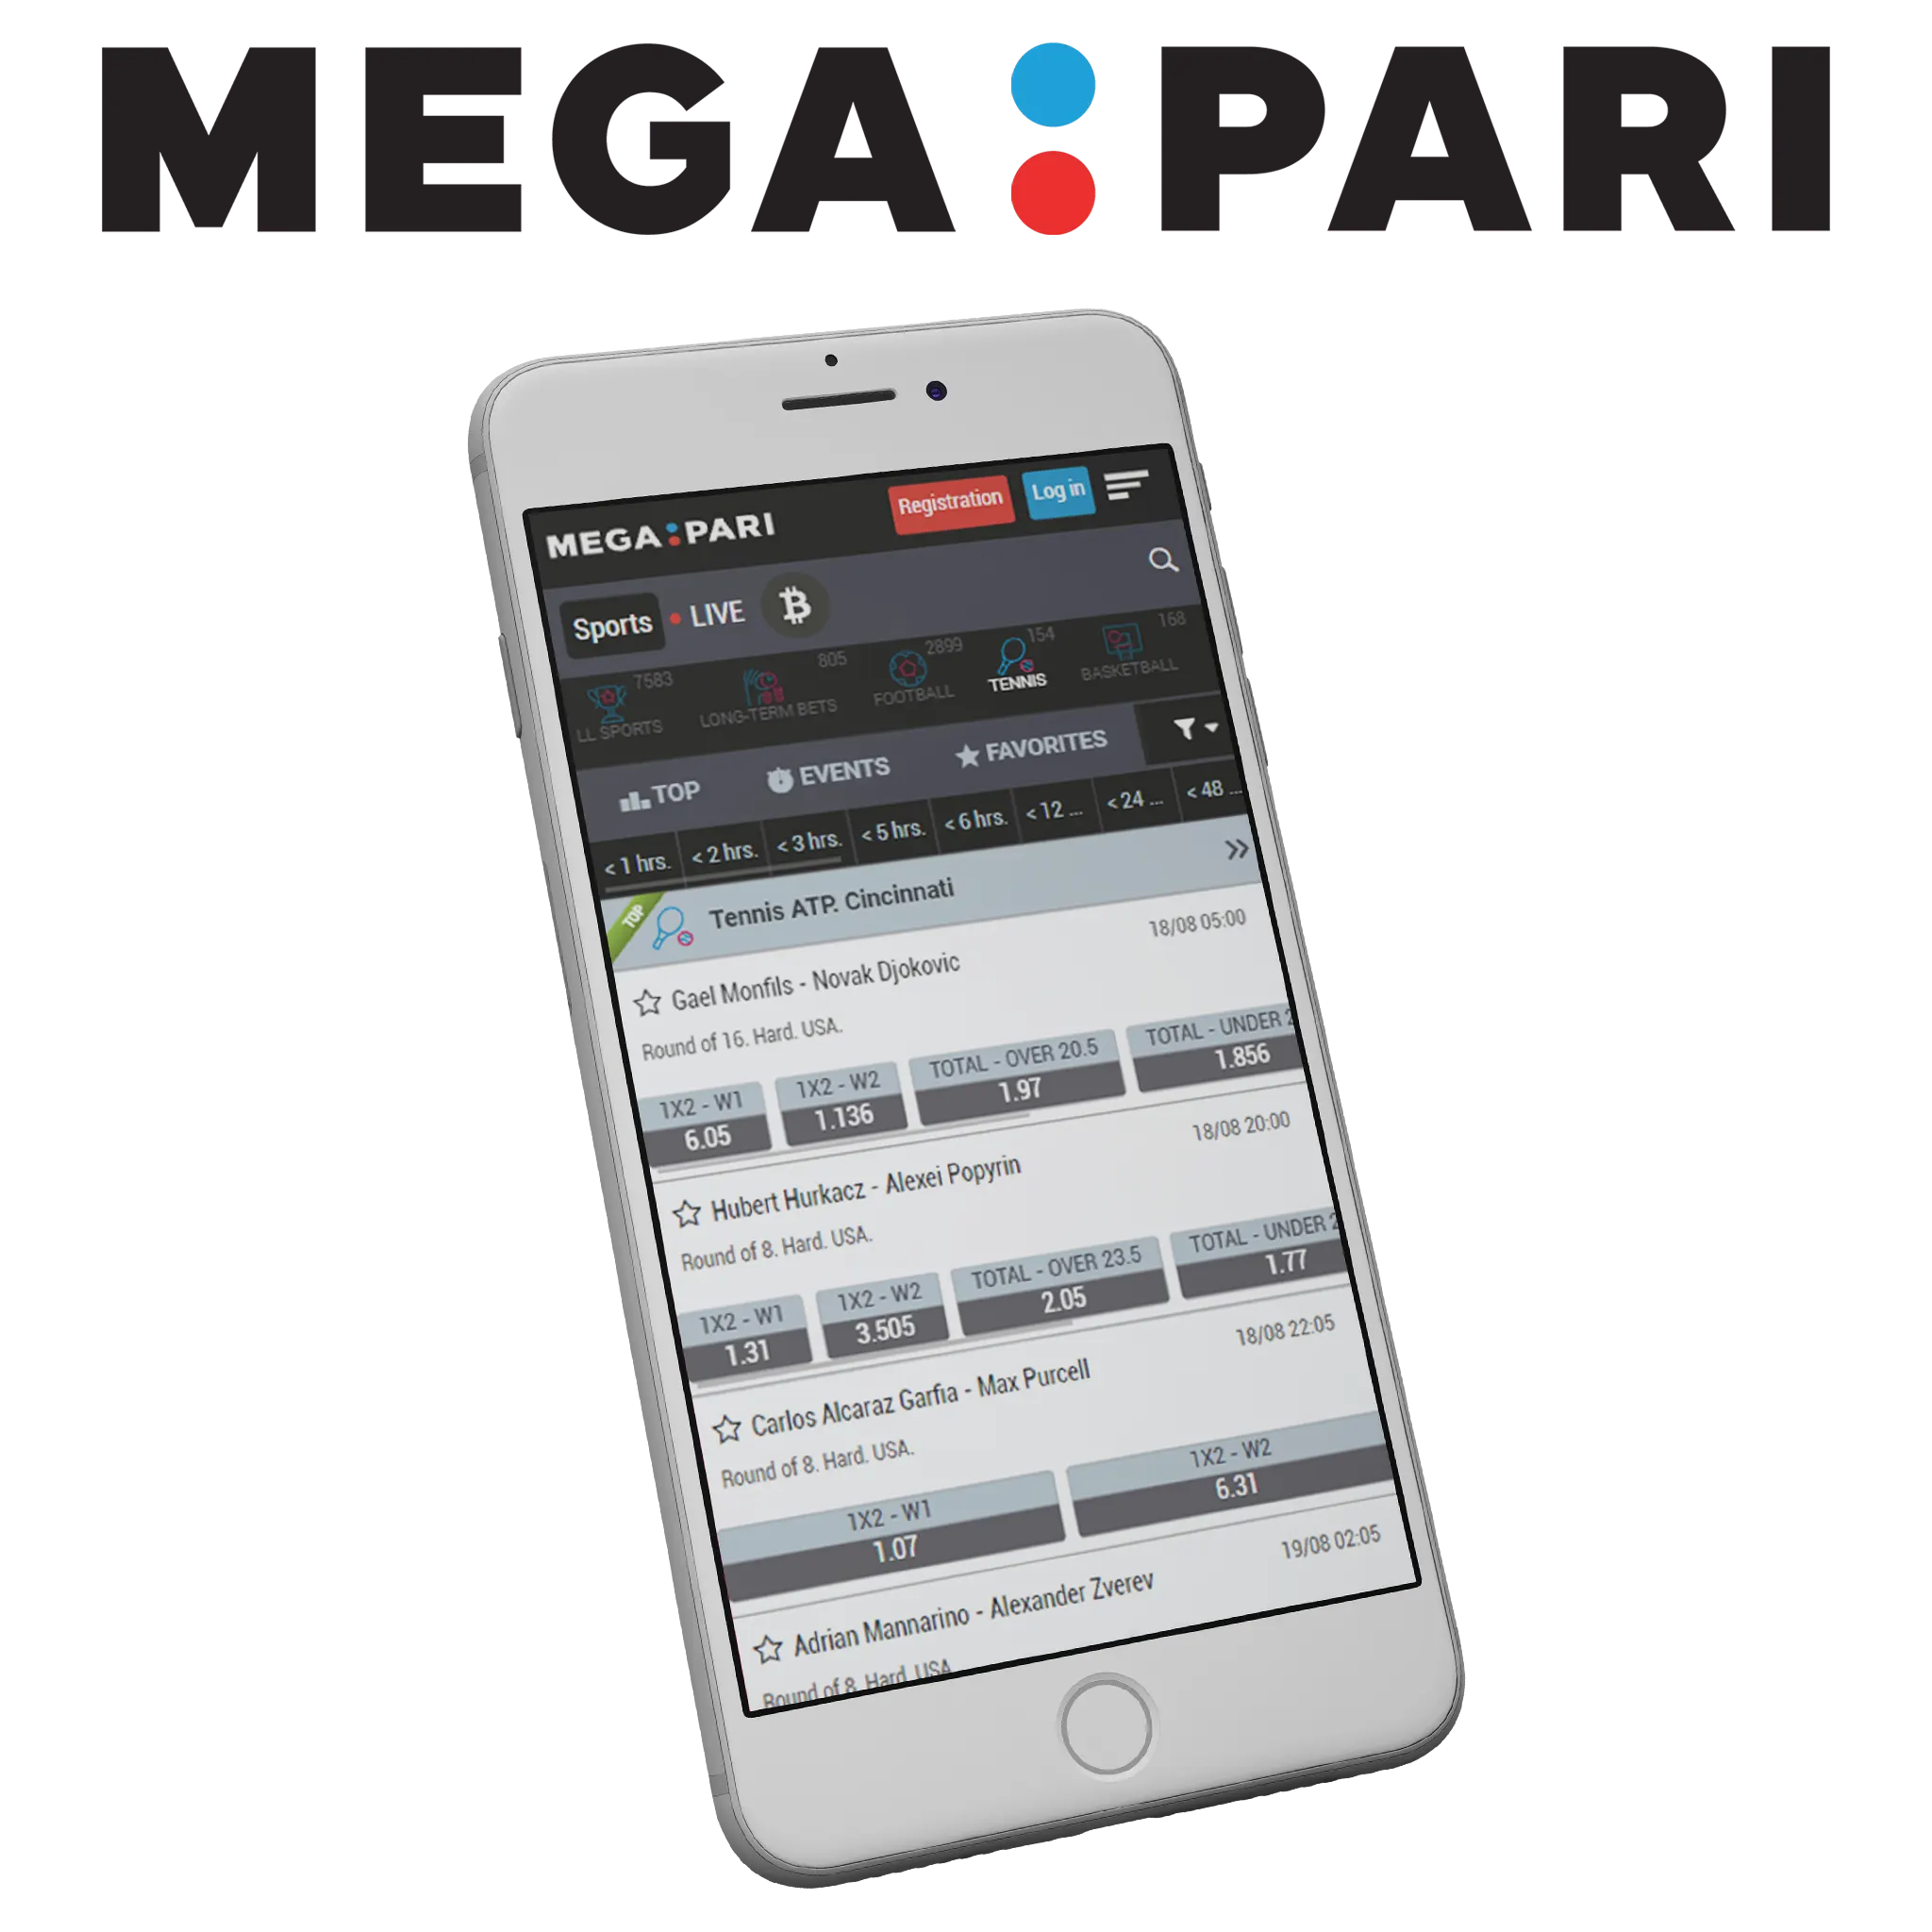 Megapari app is safe and legal in India for online tennis betting.